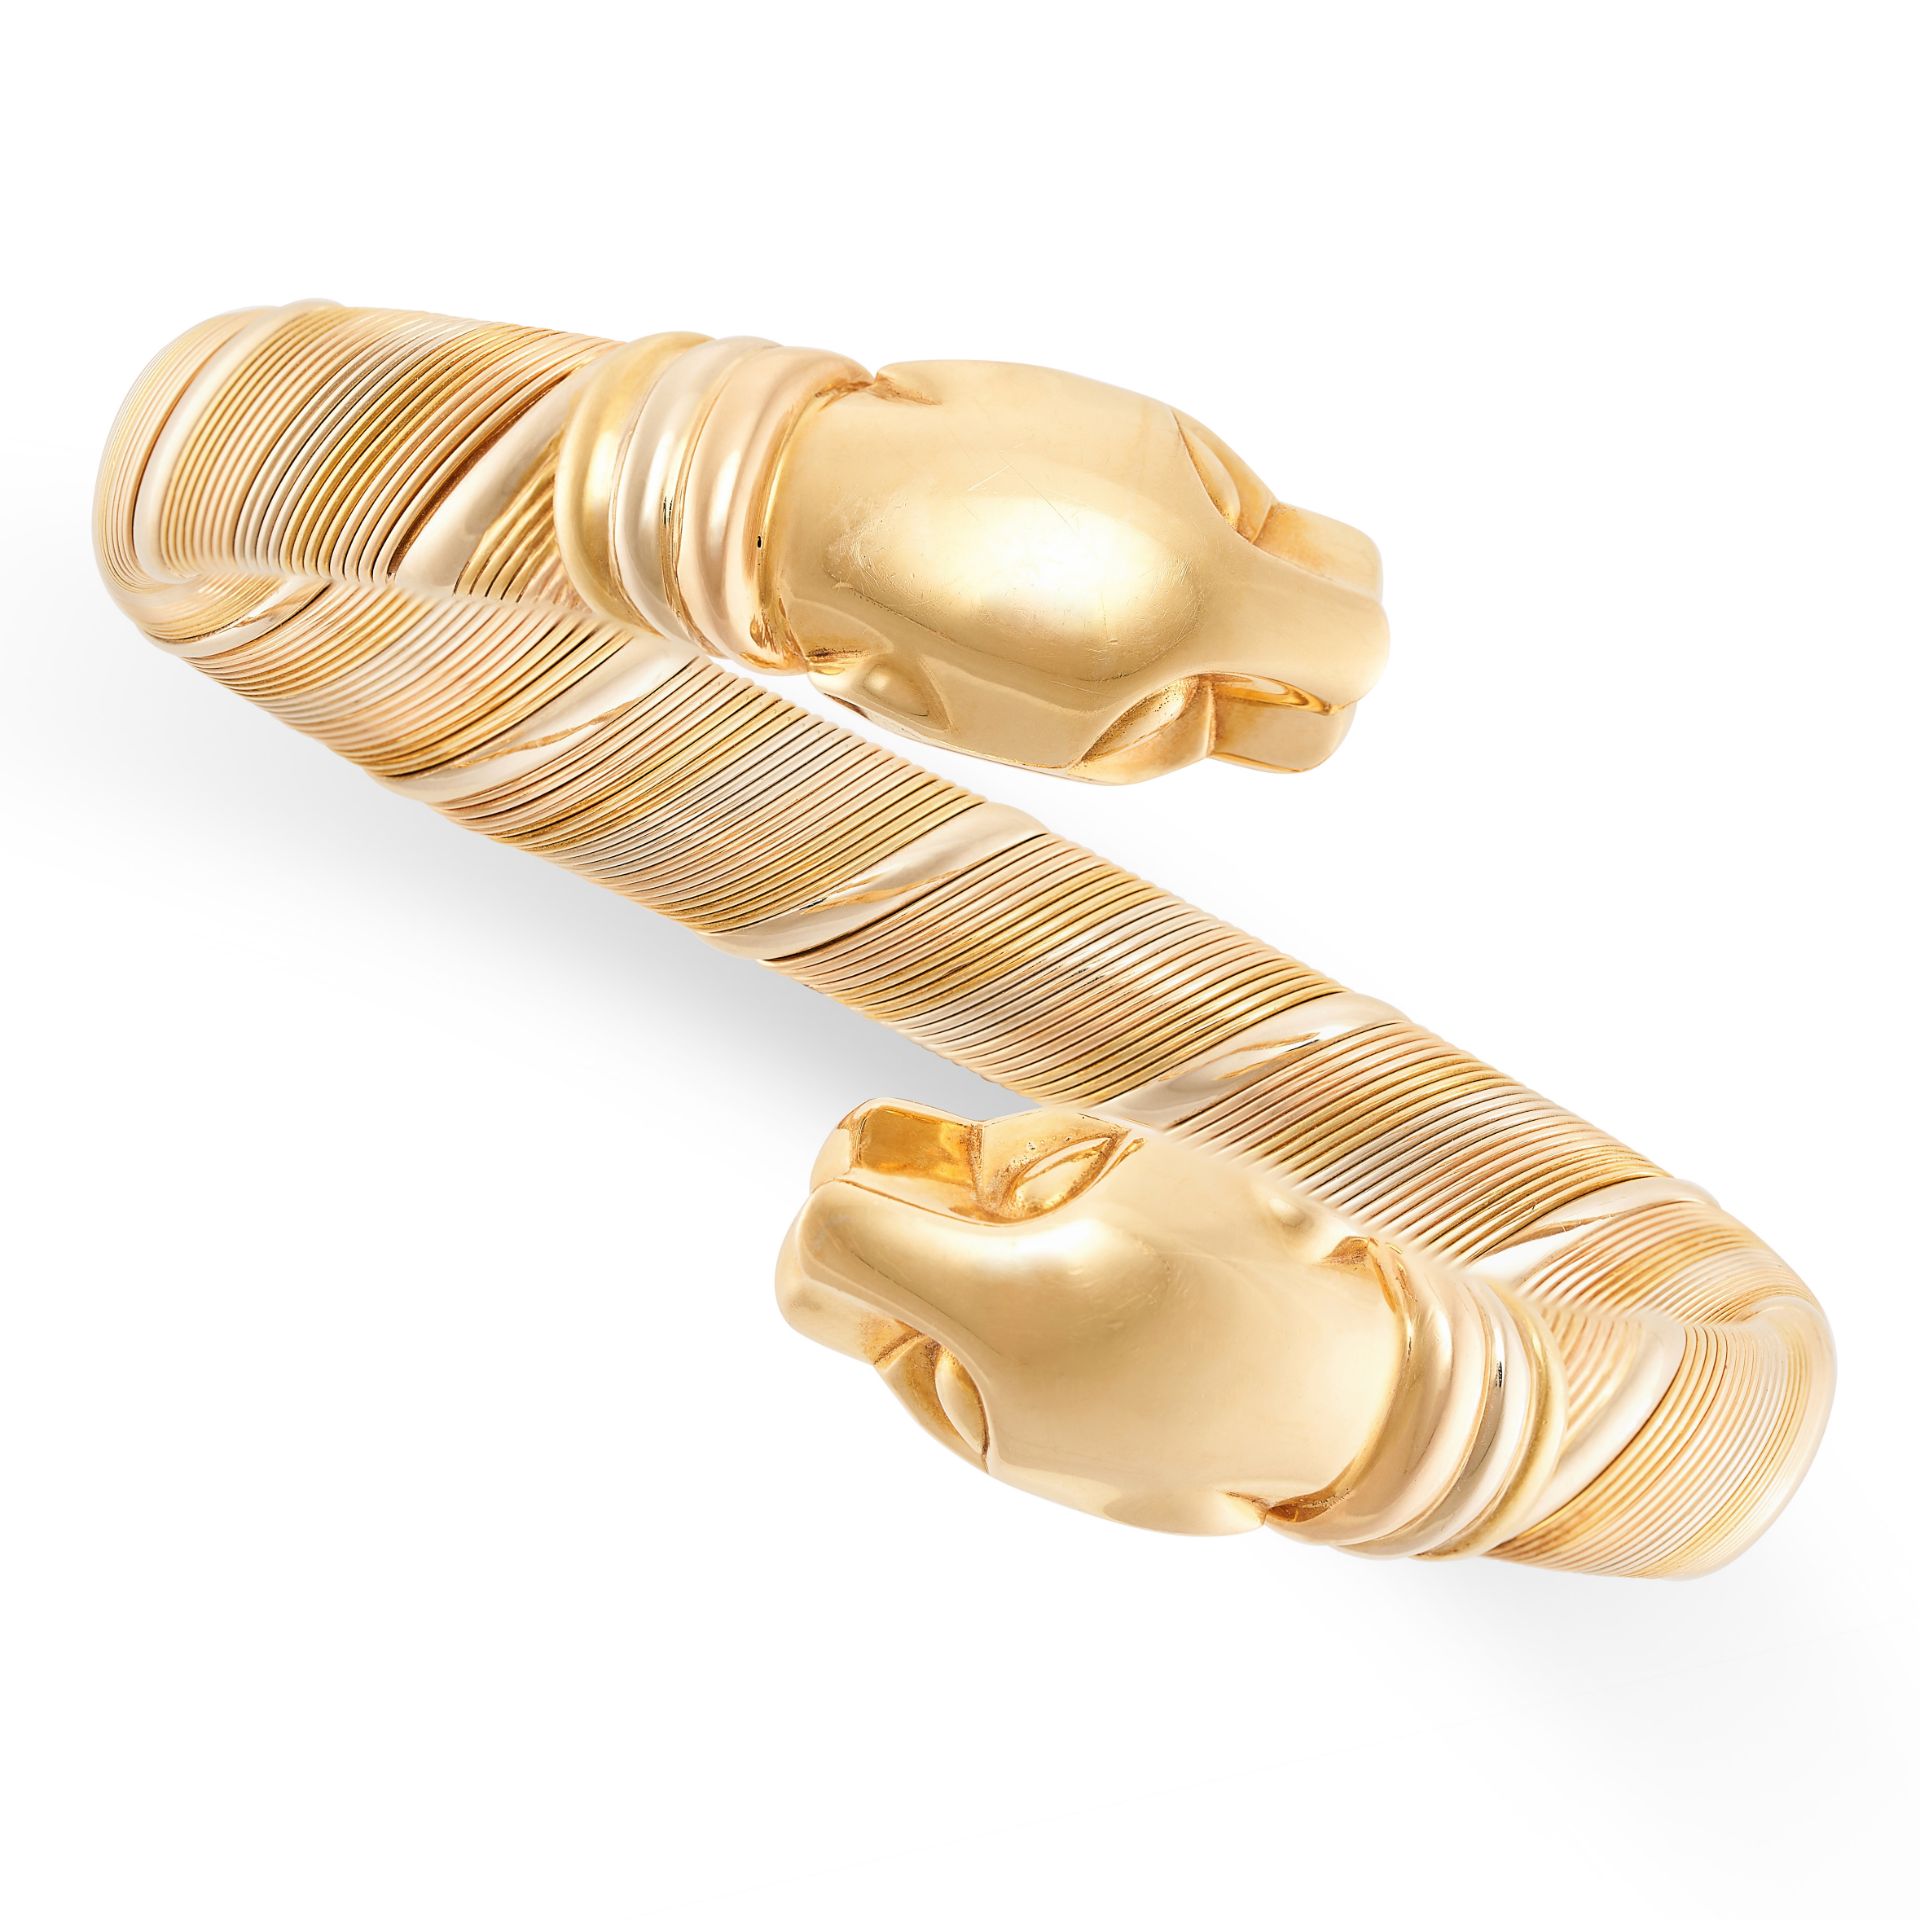 CARTIER, A VINTAGE PANTHERE DE CARTIER BANGLE in 18ct yellow, white and rose gold, the flexible body - Image 2 of 3